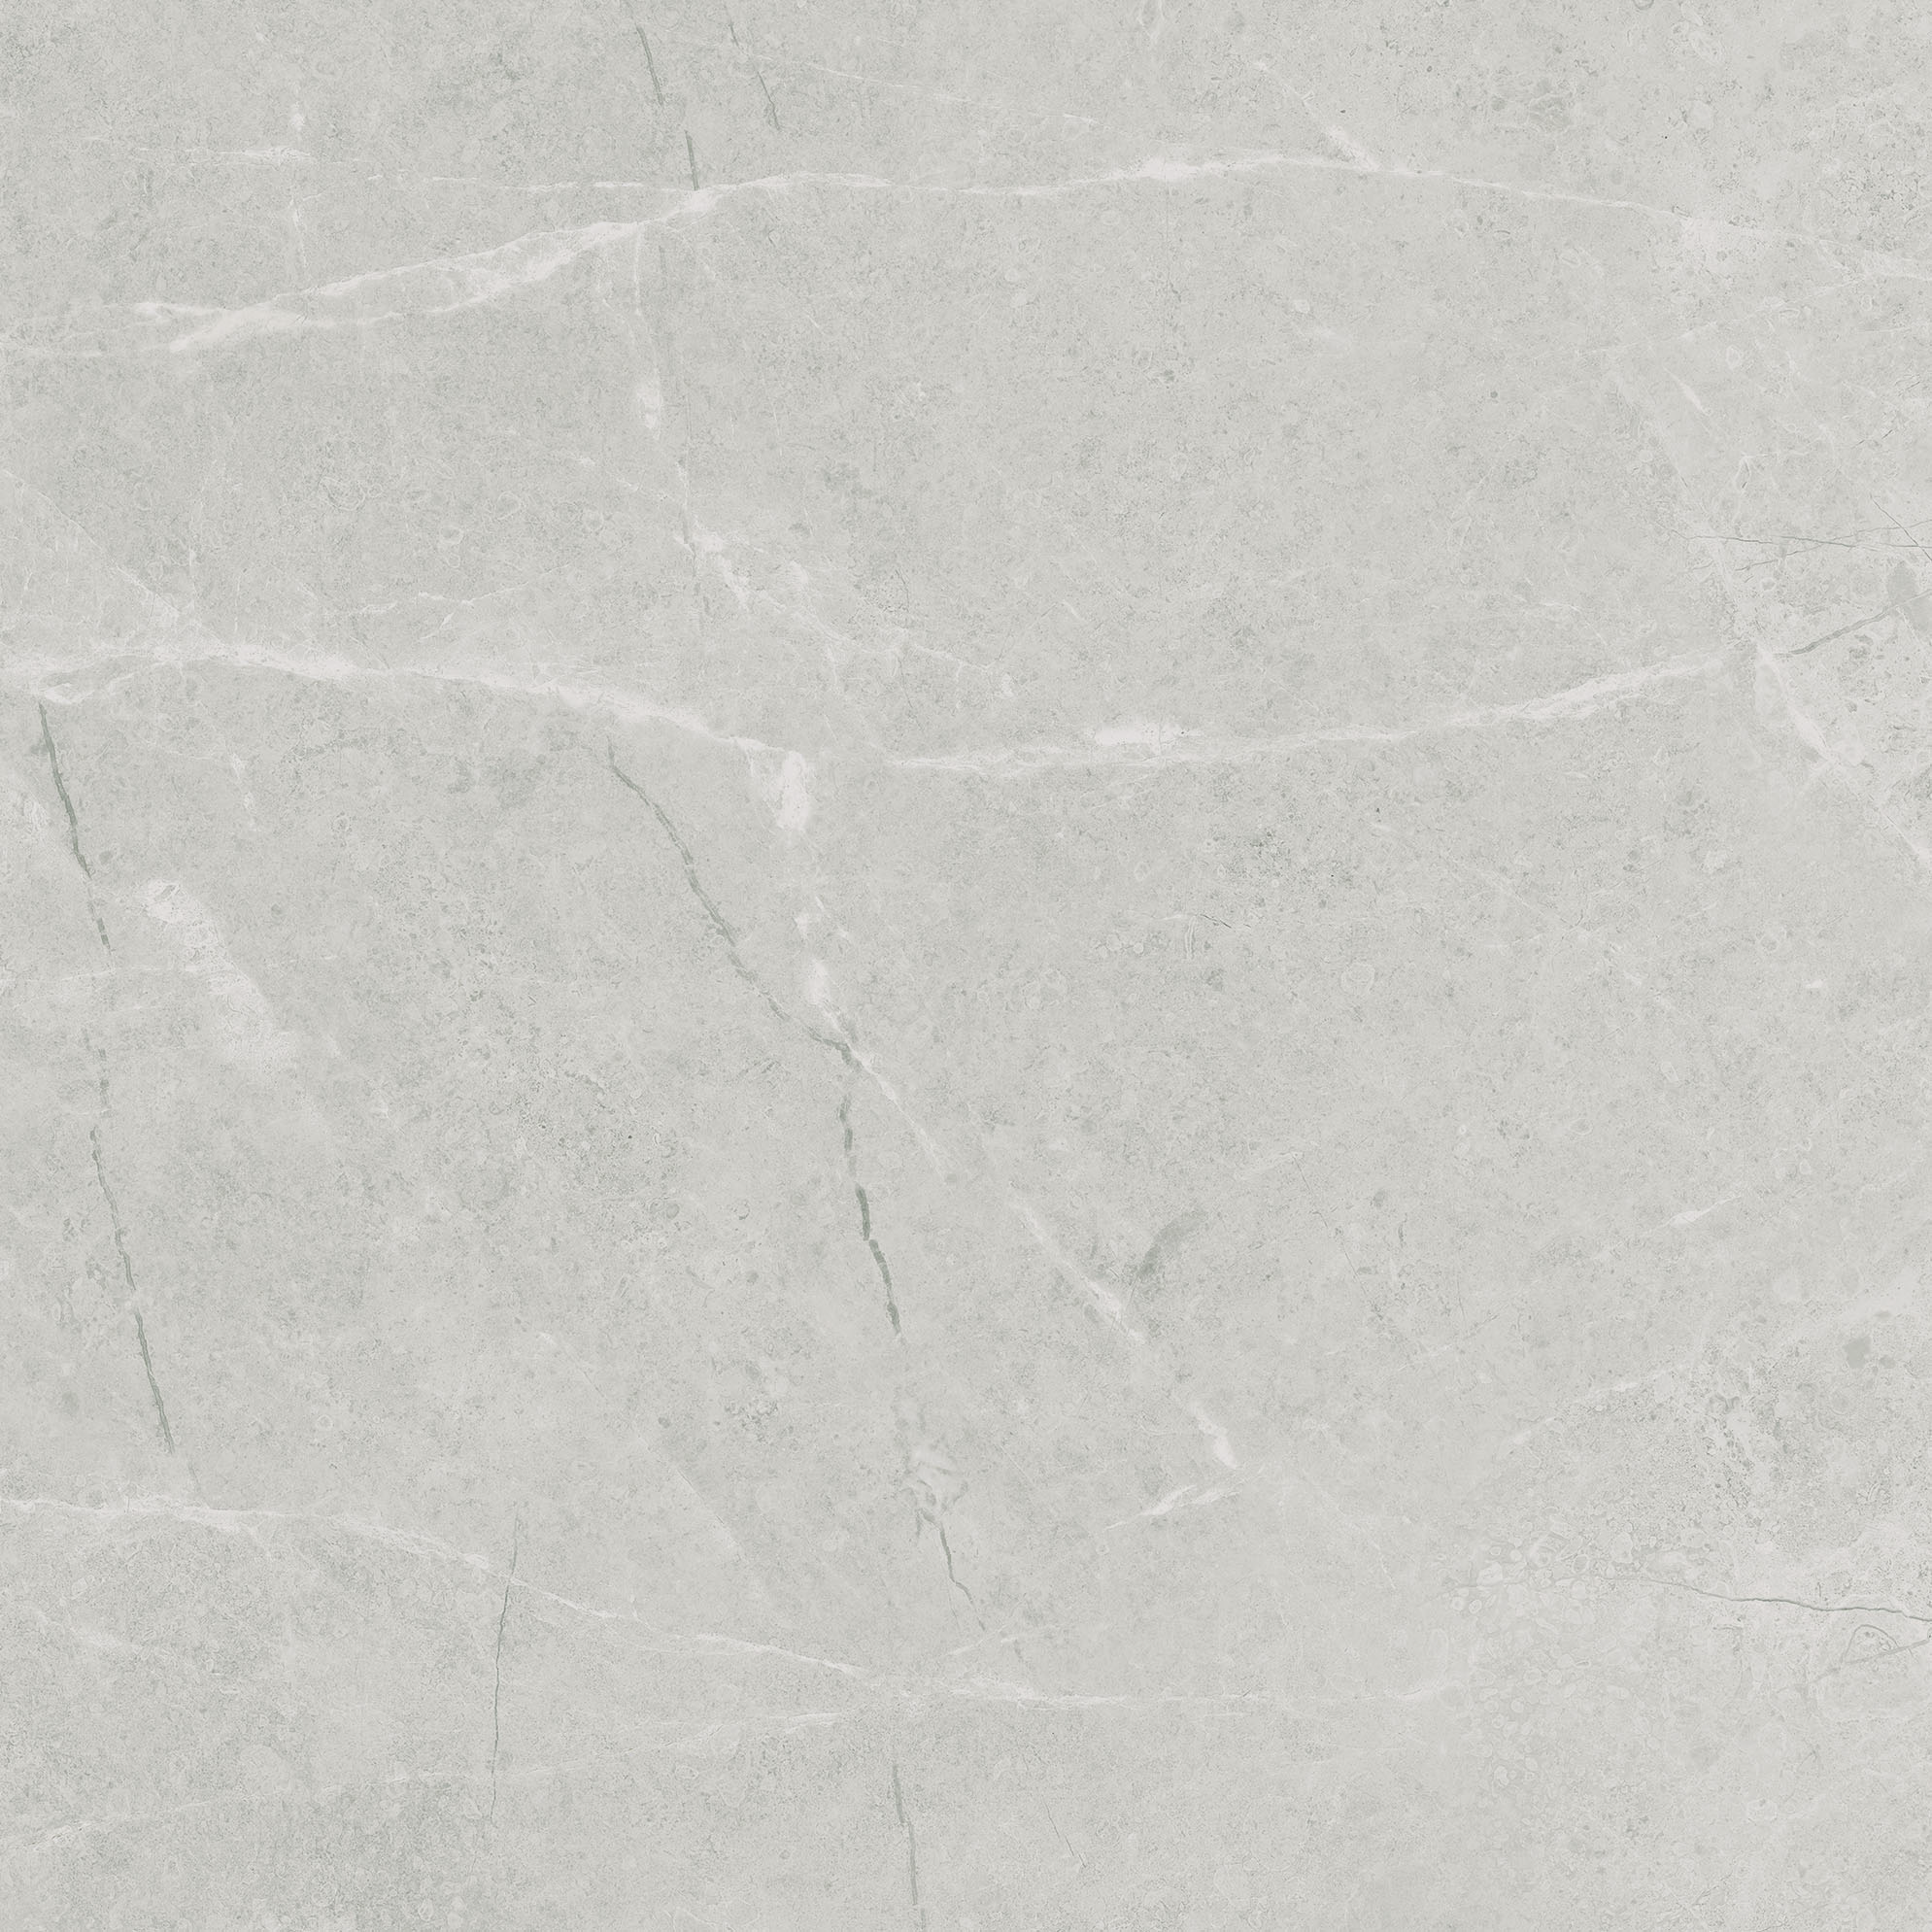 grigio pattern glazed porcelain field tile from torino anatolia collection distributed by surface group international matte finish pressed edge 20x20 square shape